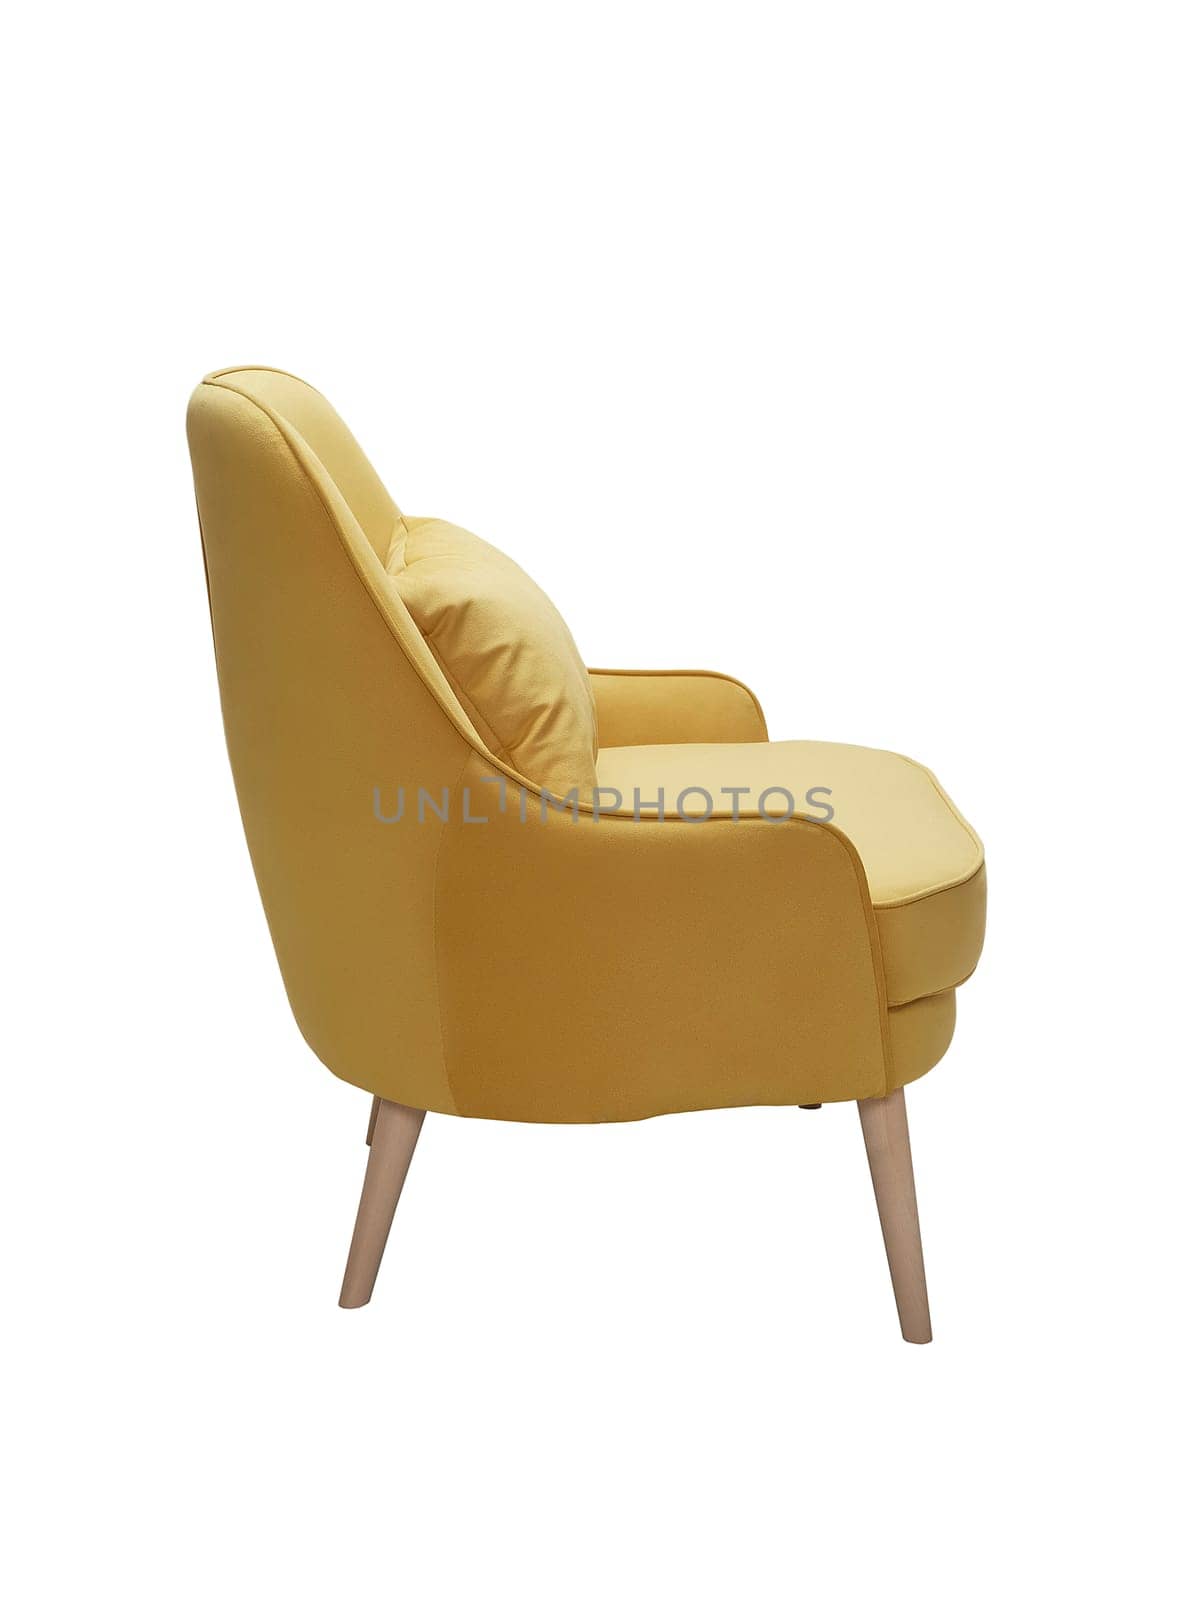 modern yellow fabric armchair with wooden legs isolated on white background, side view.